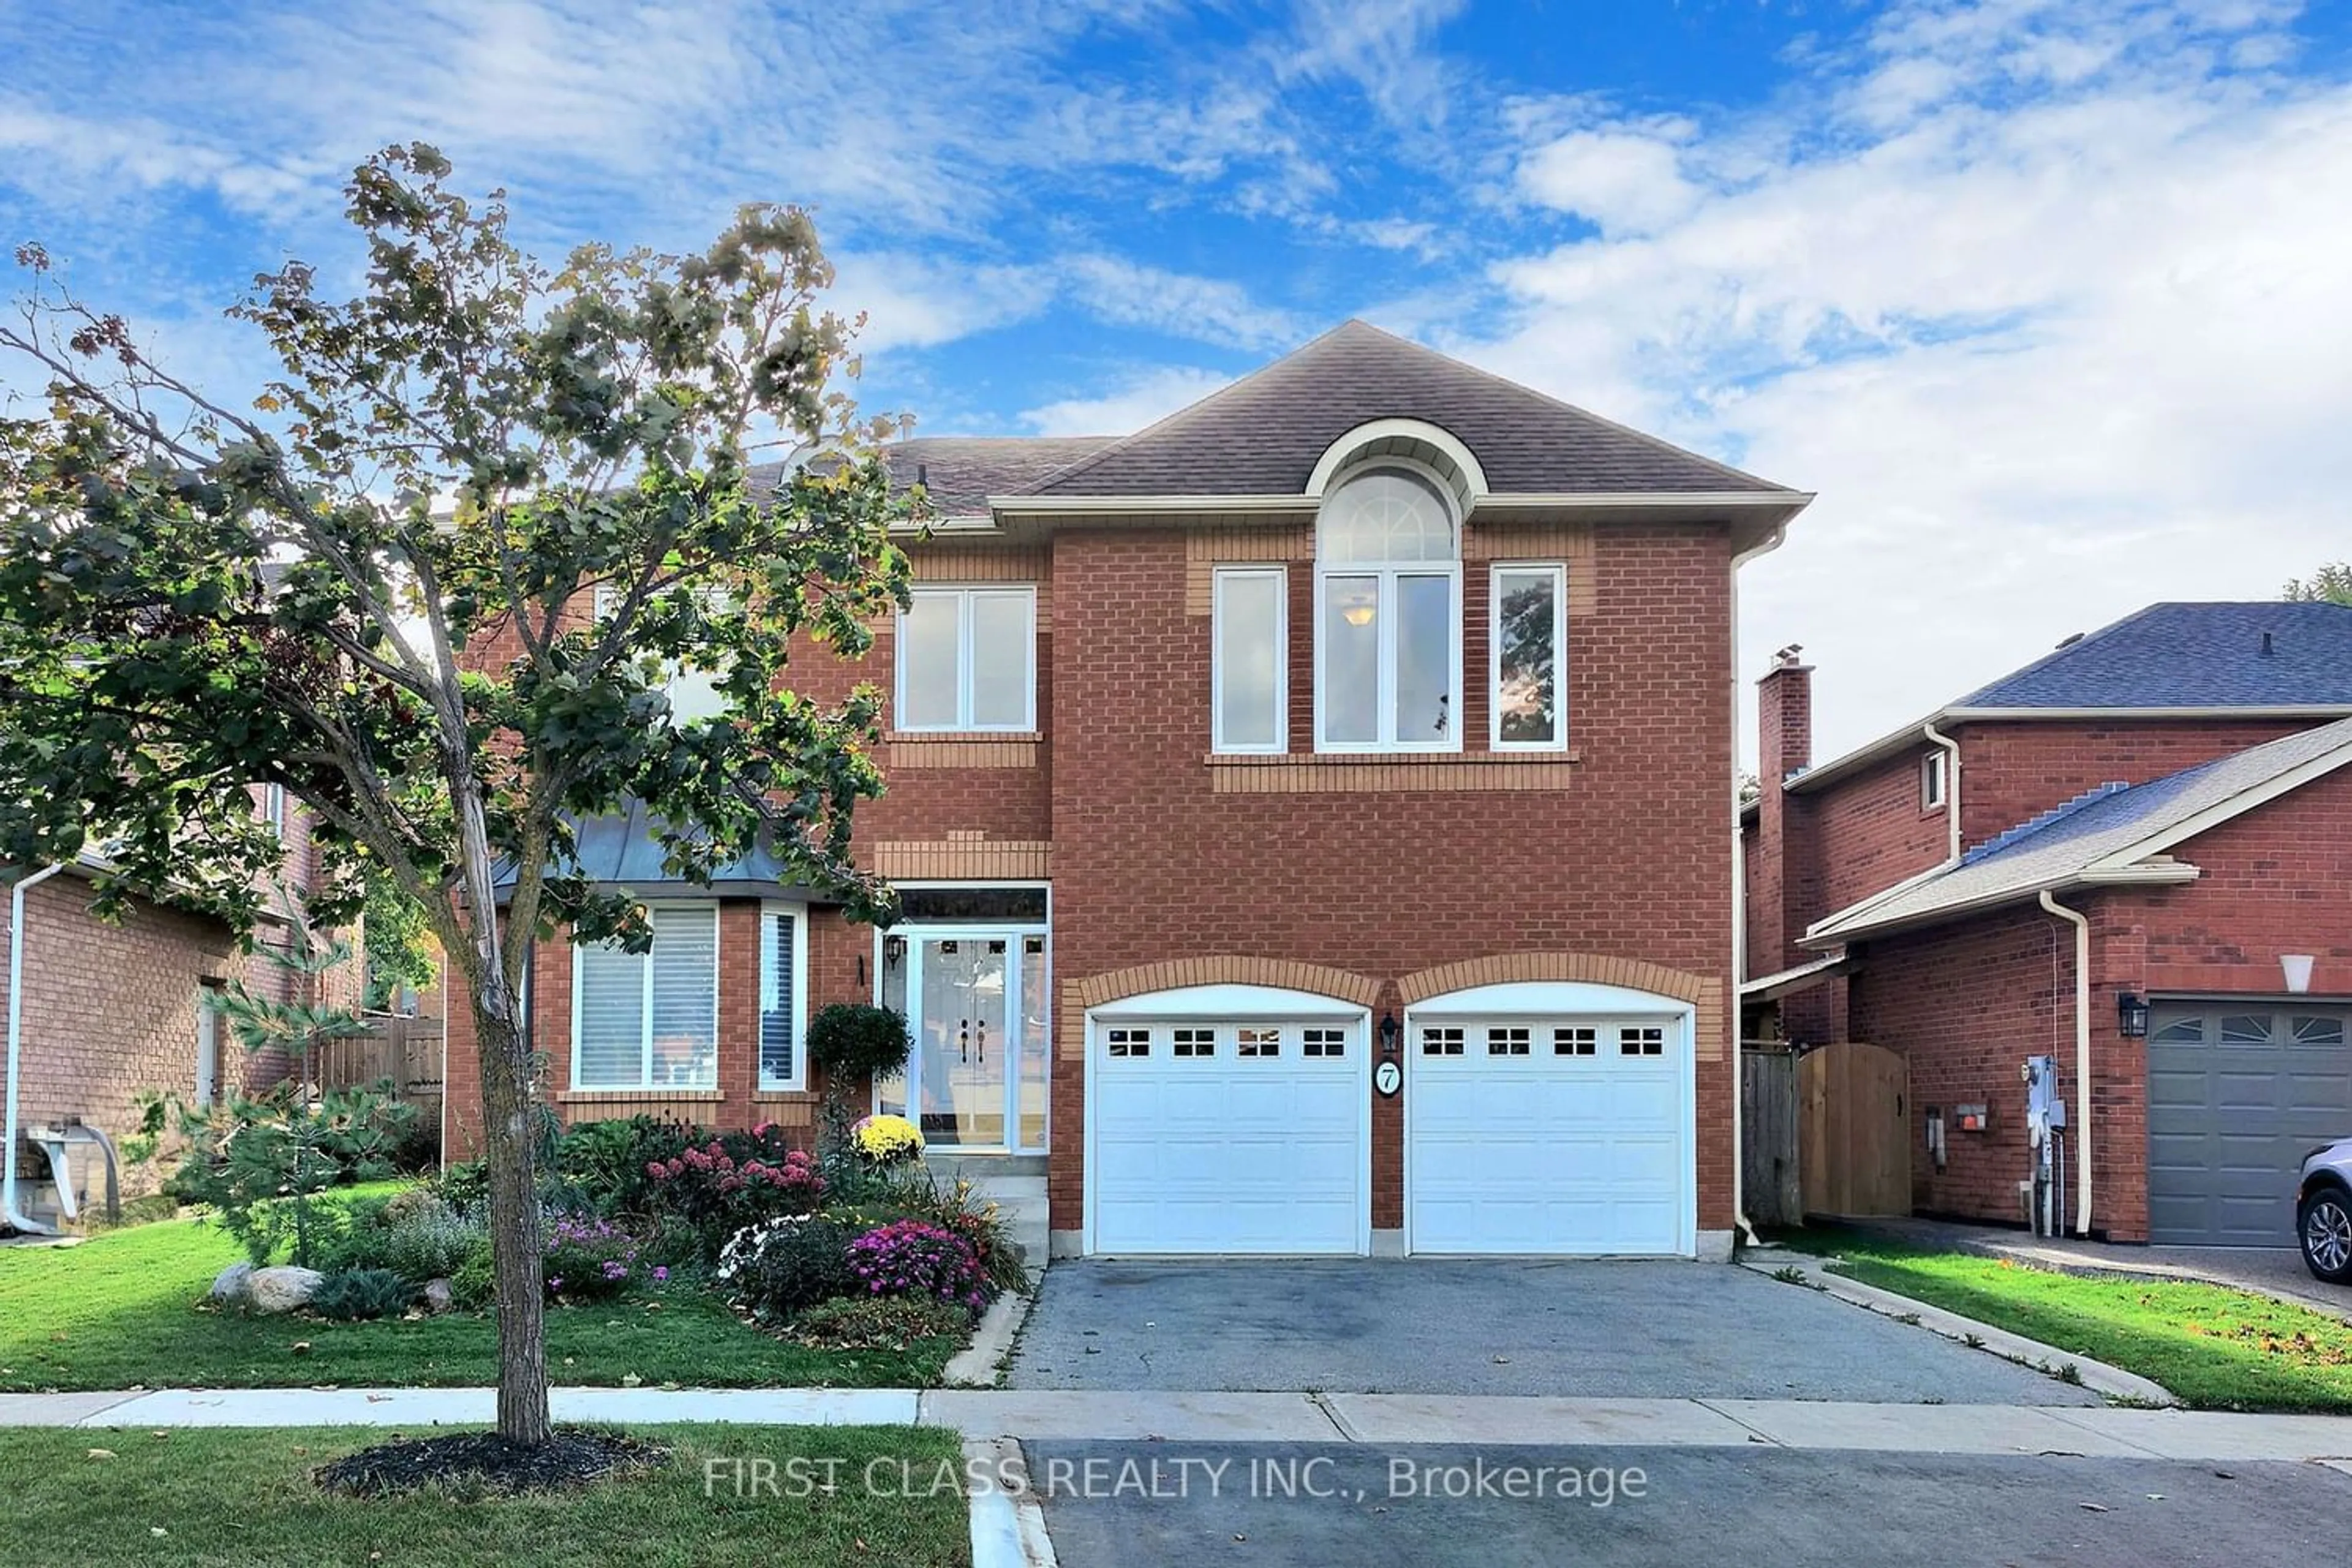 Home with brick exterior material for 7 Kenpark Ave, Brampton Ontario L6Z 3P4